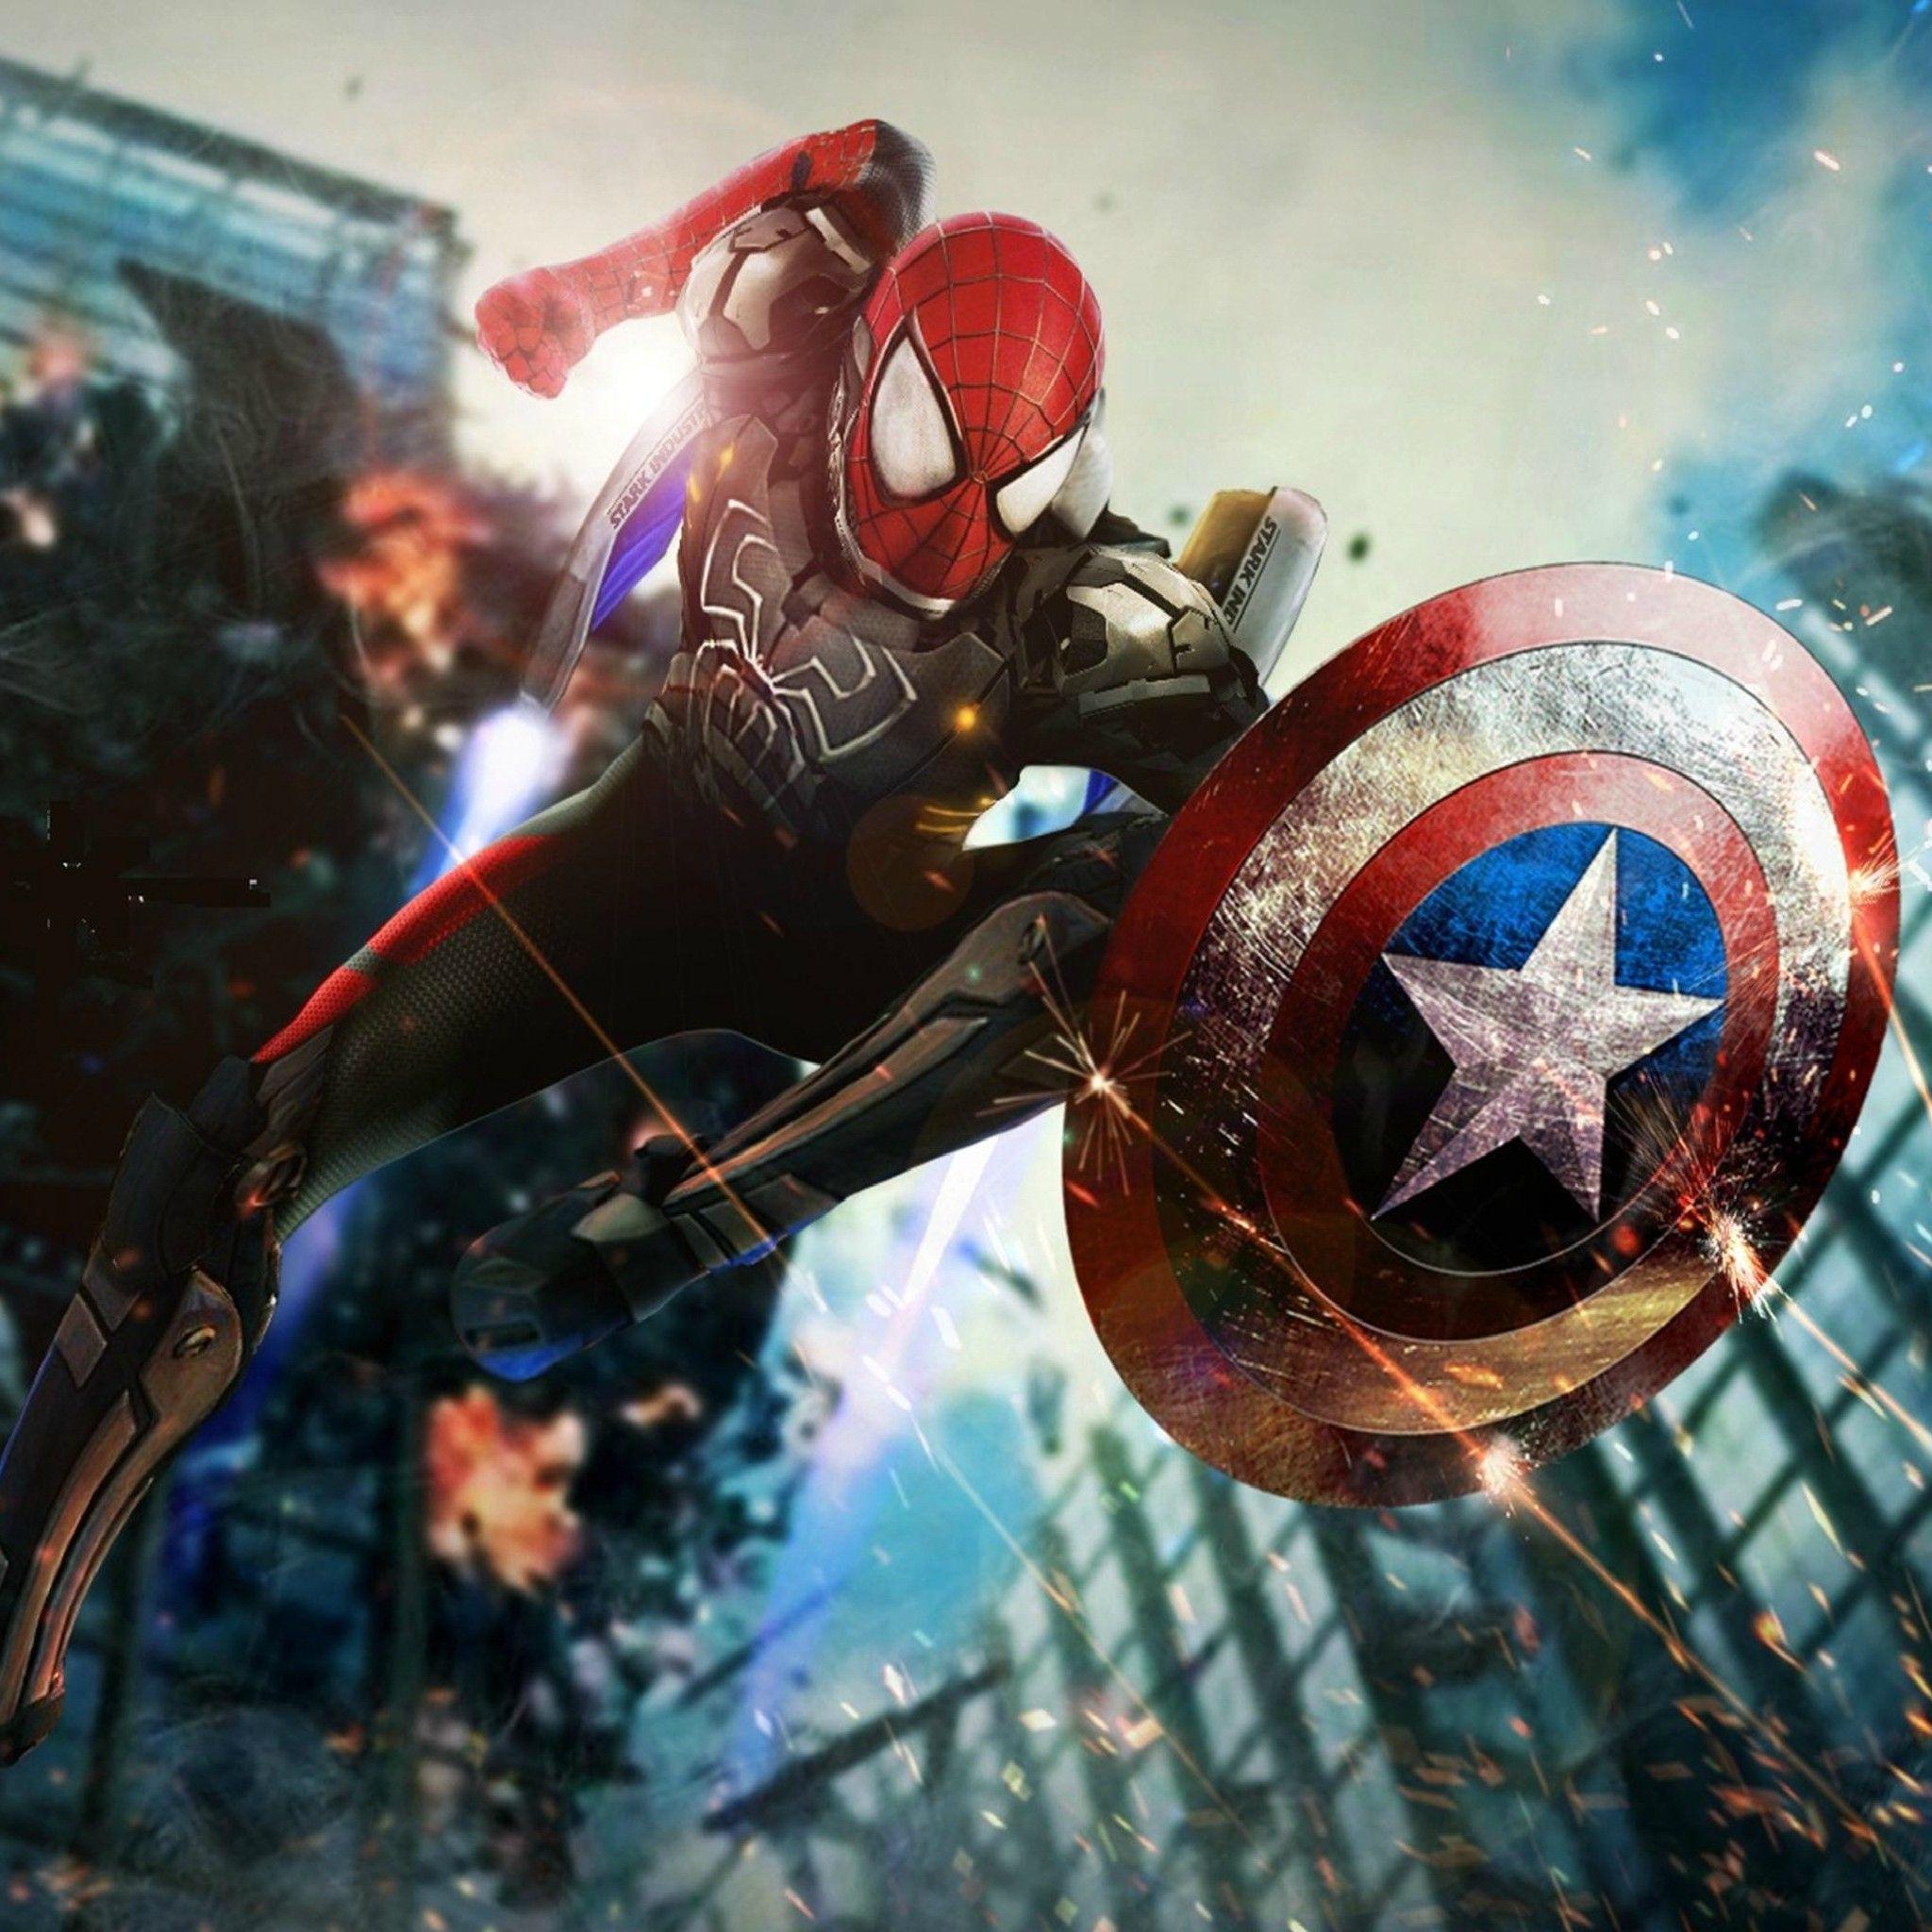 Spiderman or Captain America? Tap to see more Civil War: Captain